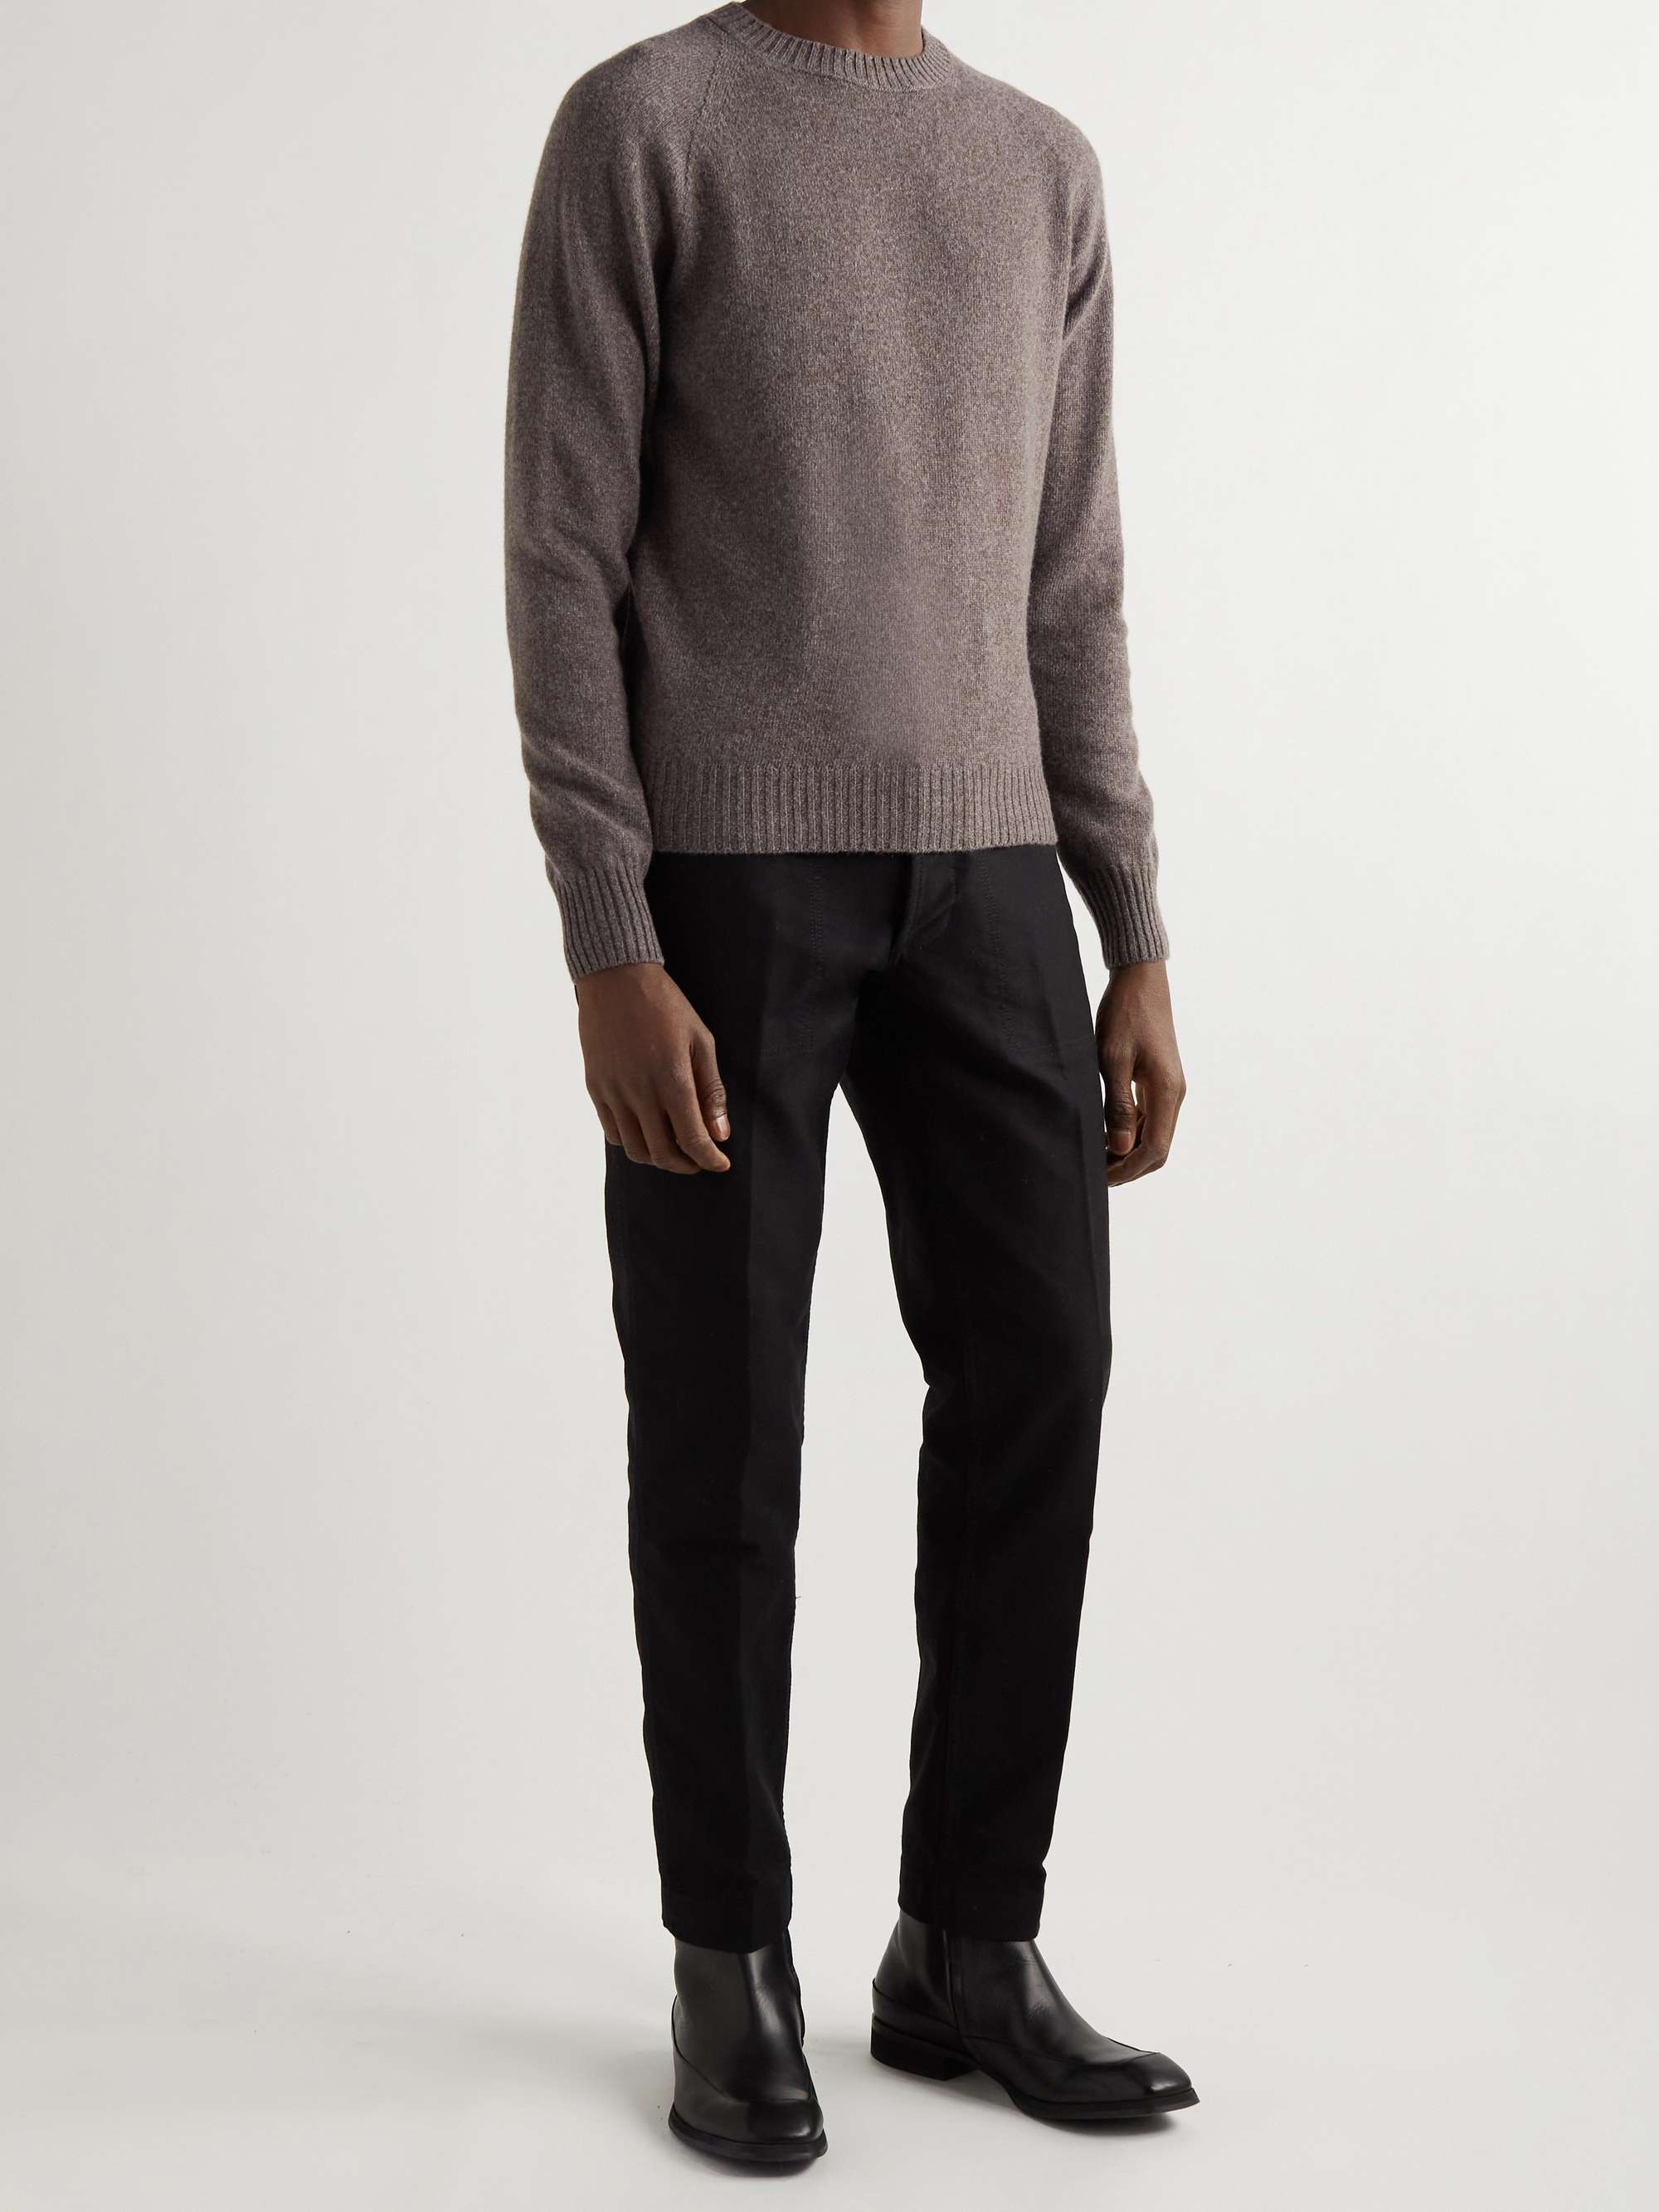 TOM FORD Cashmere and Cotton-Blend Sweater for Men | MR PORTER